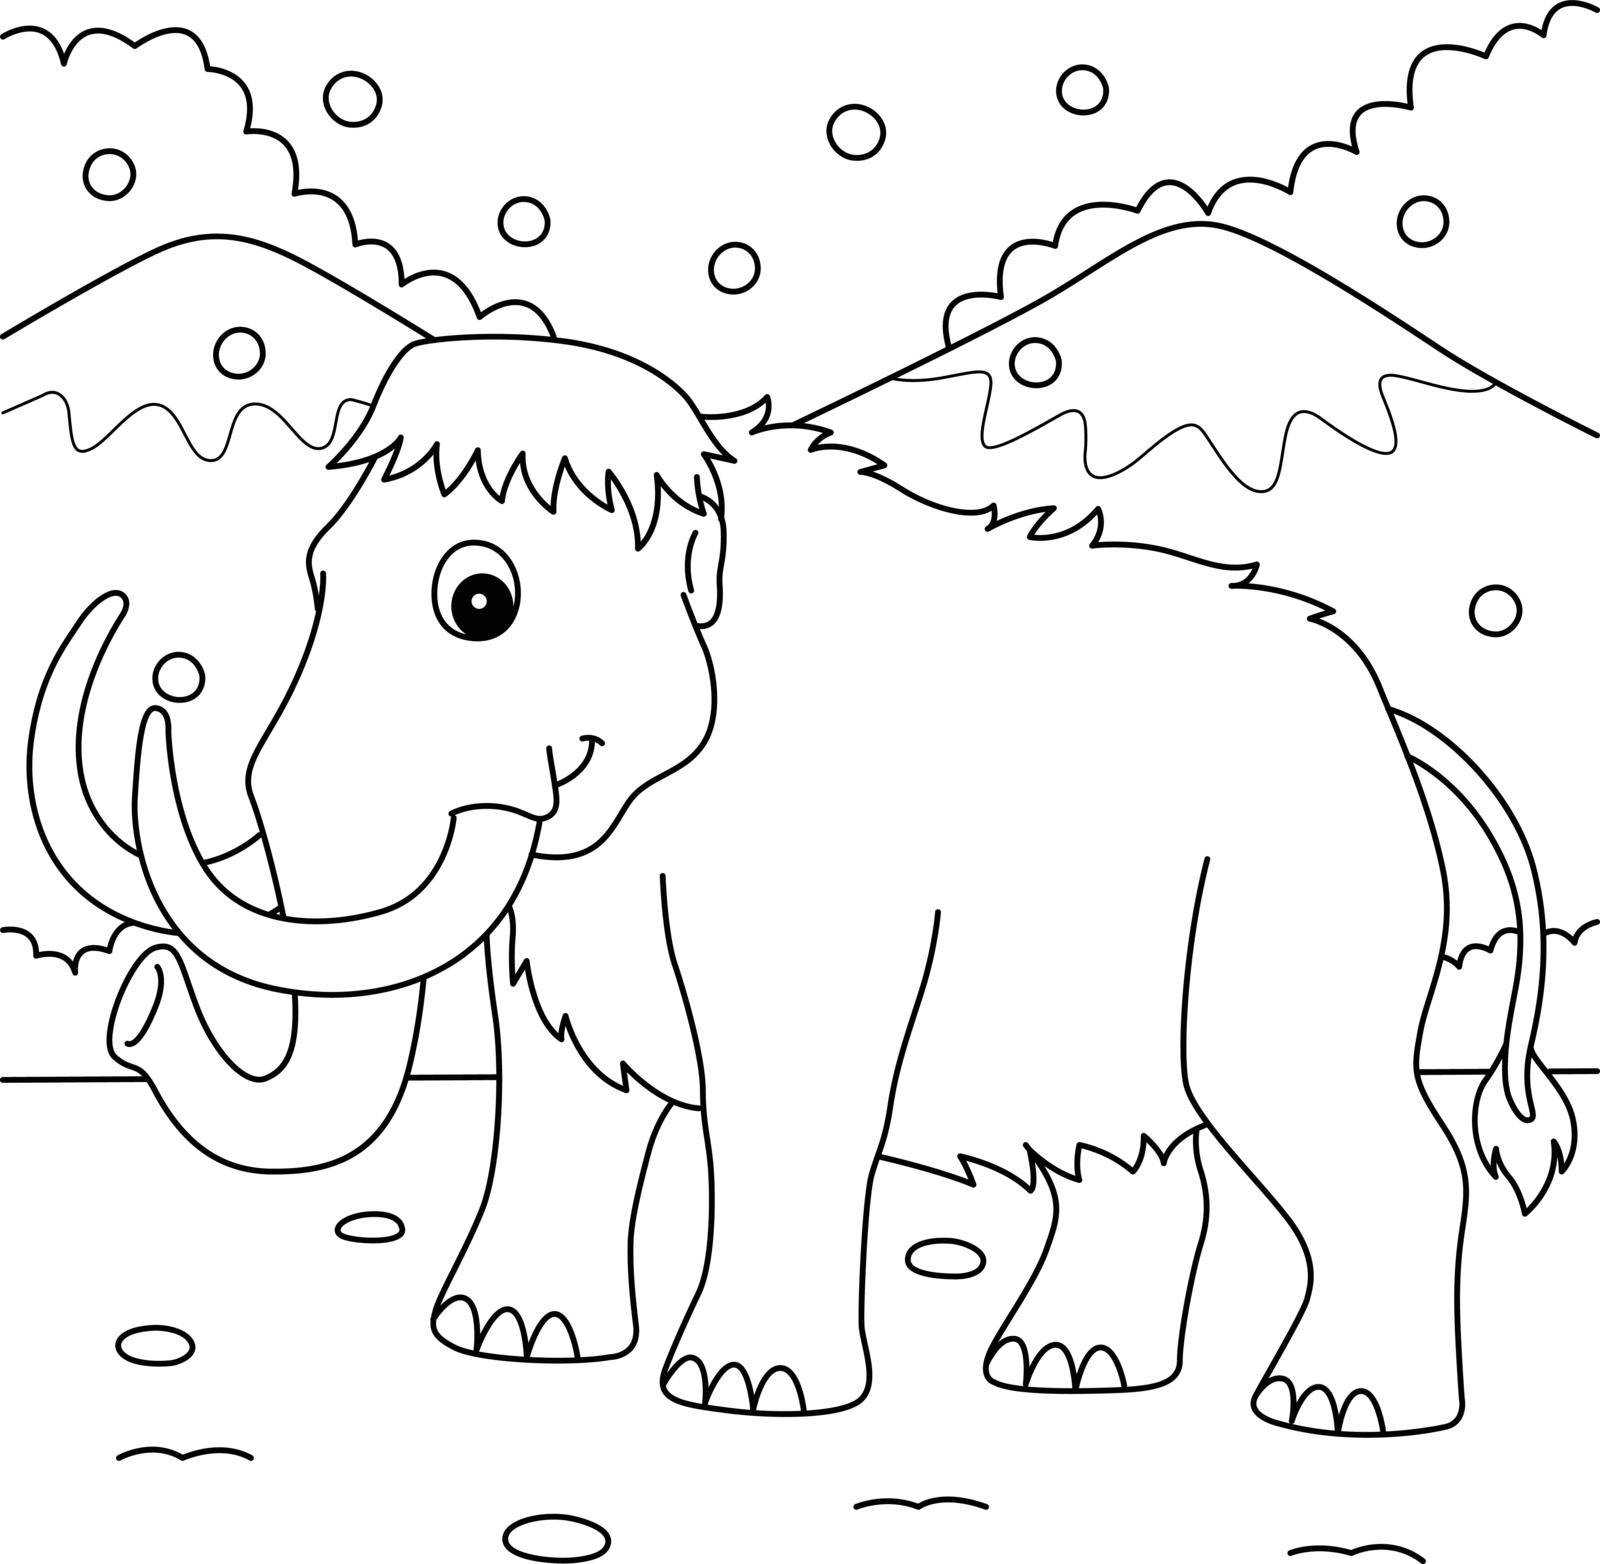 Mammoth Animal Coloring Page for Kids by abbydesign